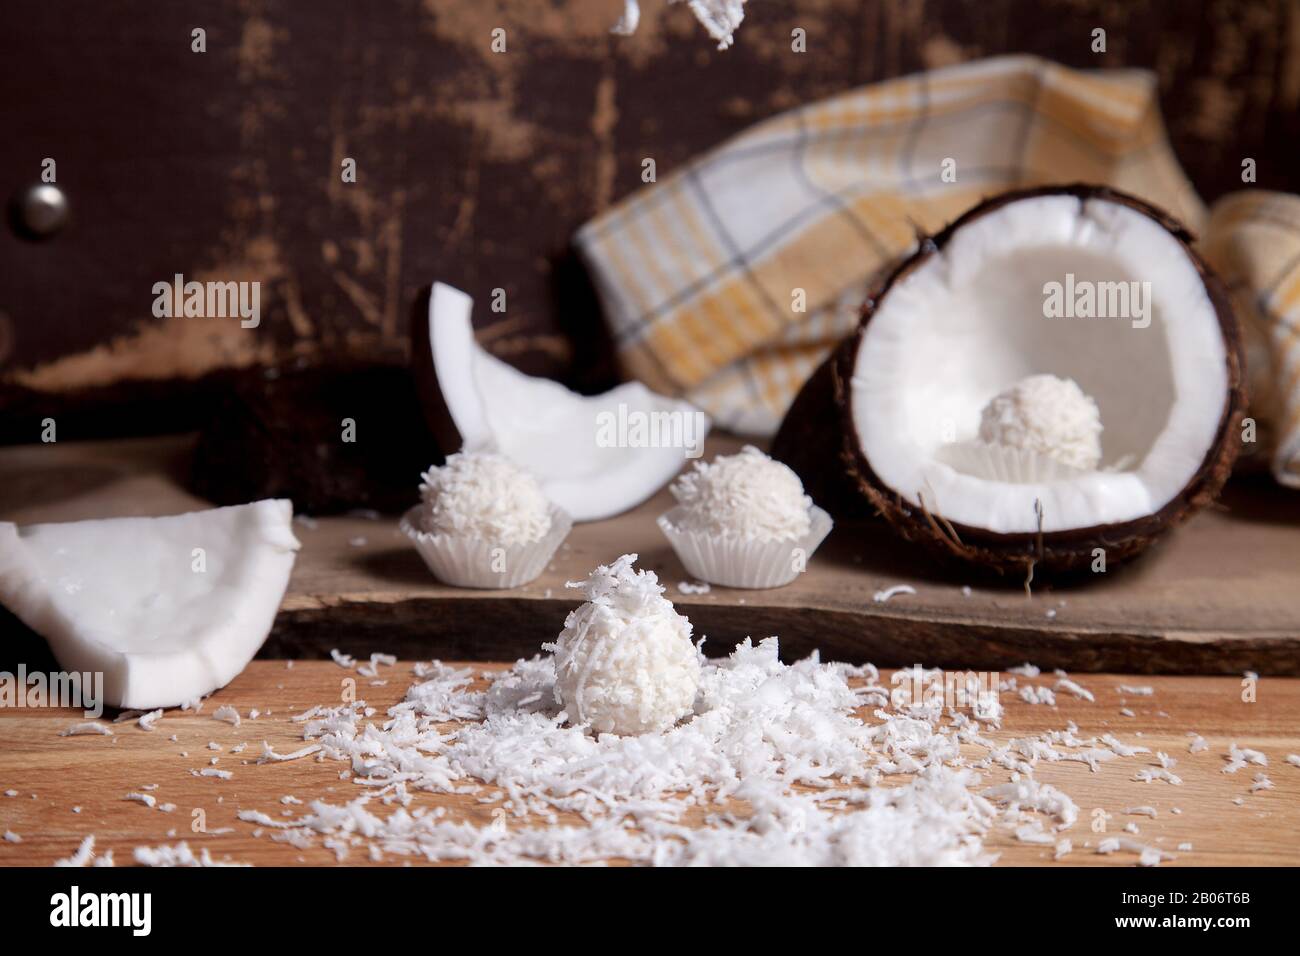 Close up of coconut with white pulp, coconut chip and sweet chocolate coconut truffles. Coconut shell, coconut flakes, small pieces of crashed nut, co Stock Photo